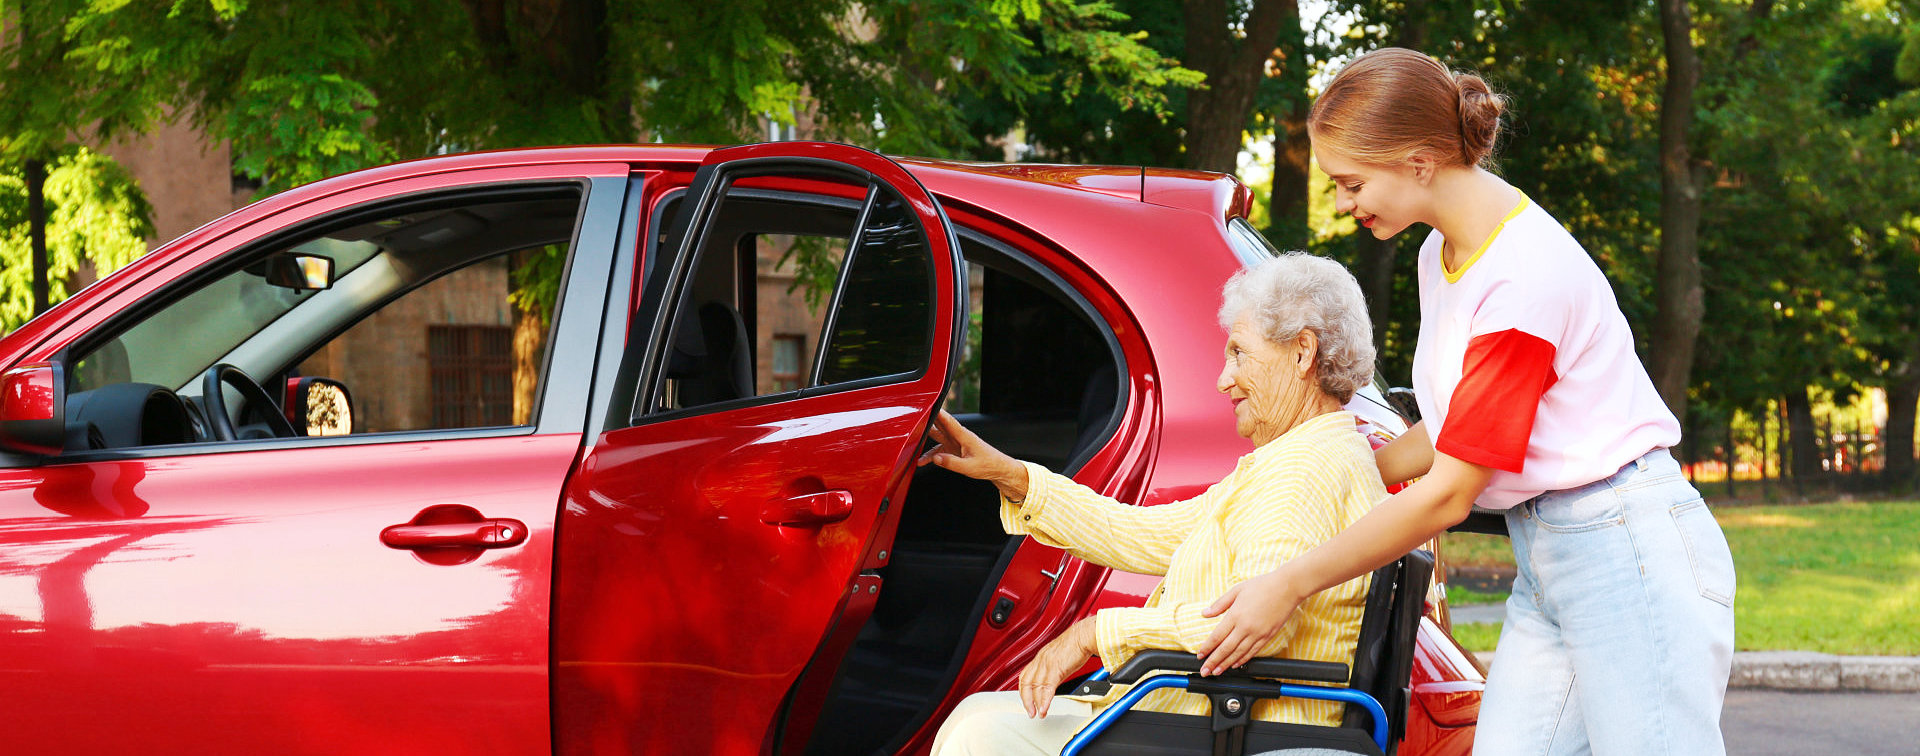 caregiver helping senior woman get in the car